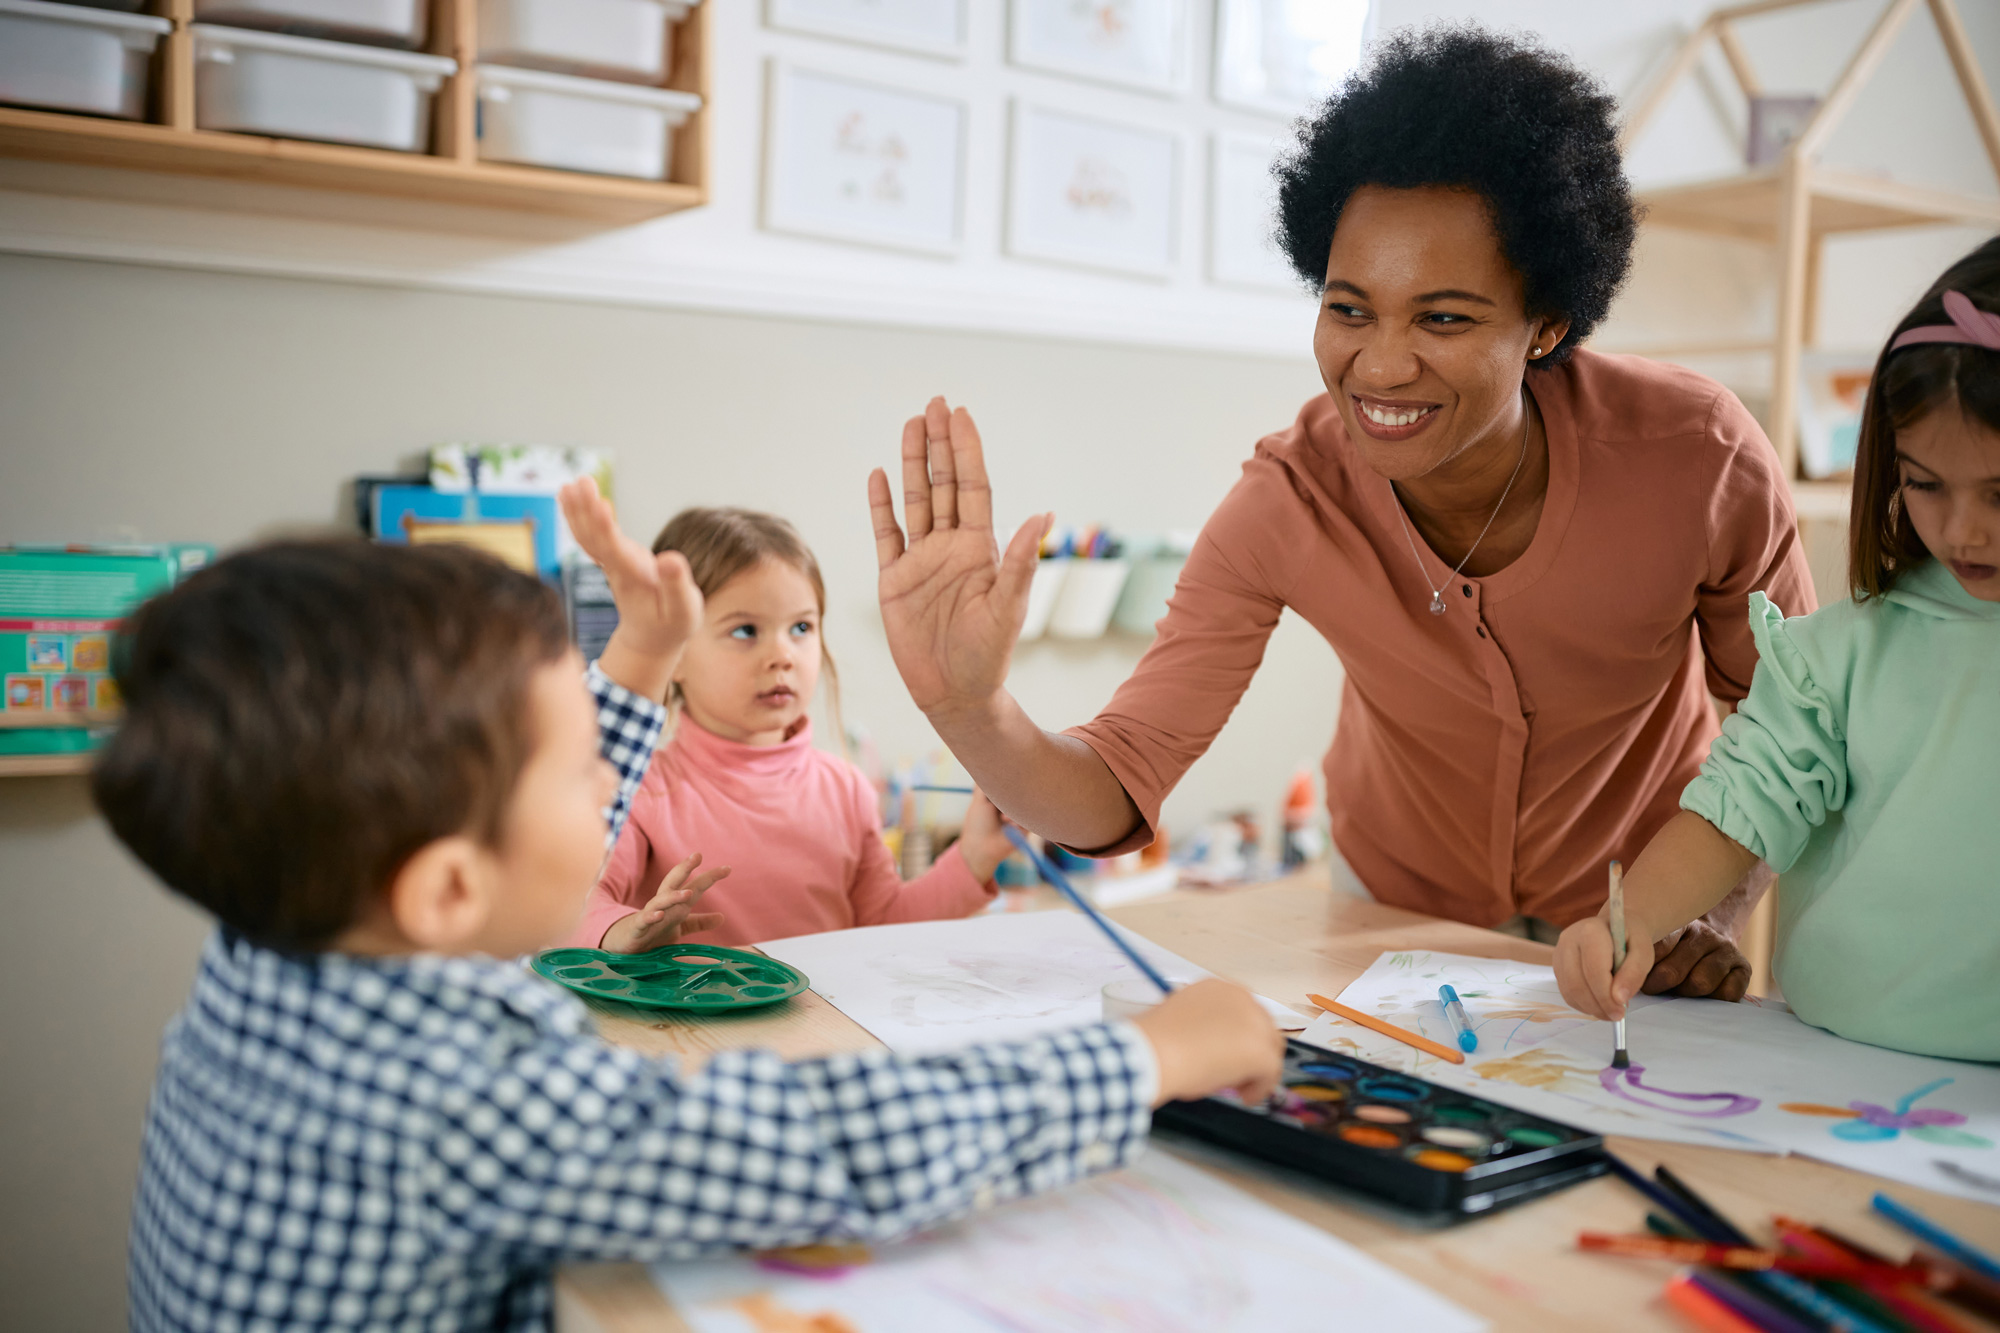 Daycare worker high fives children during class